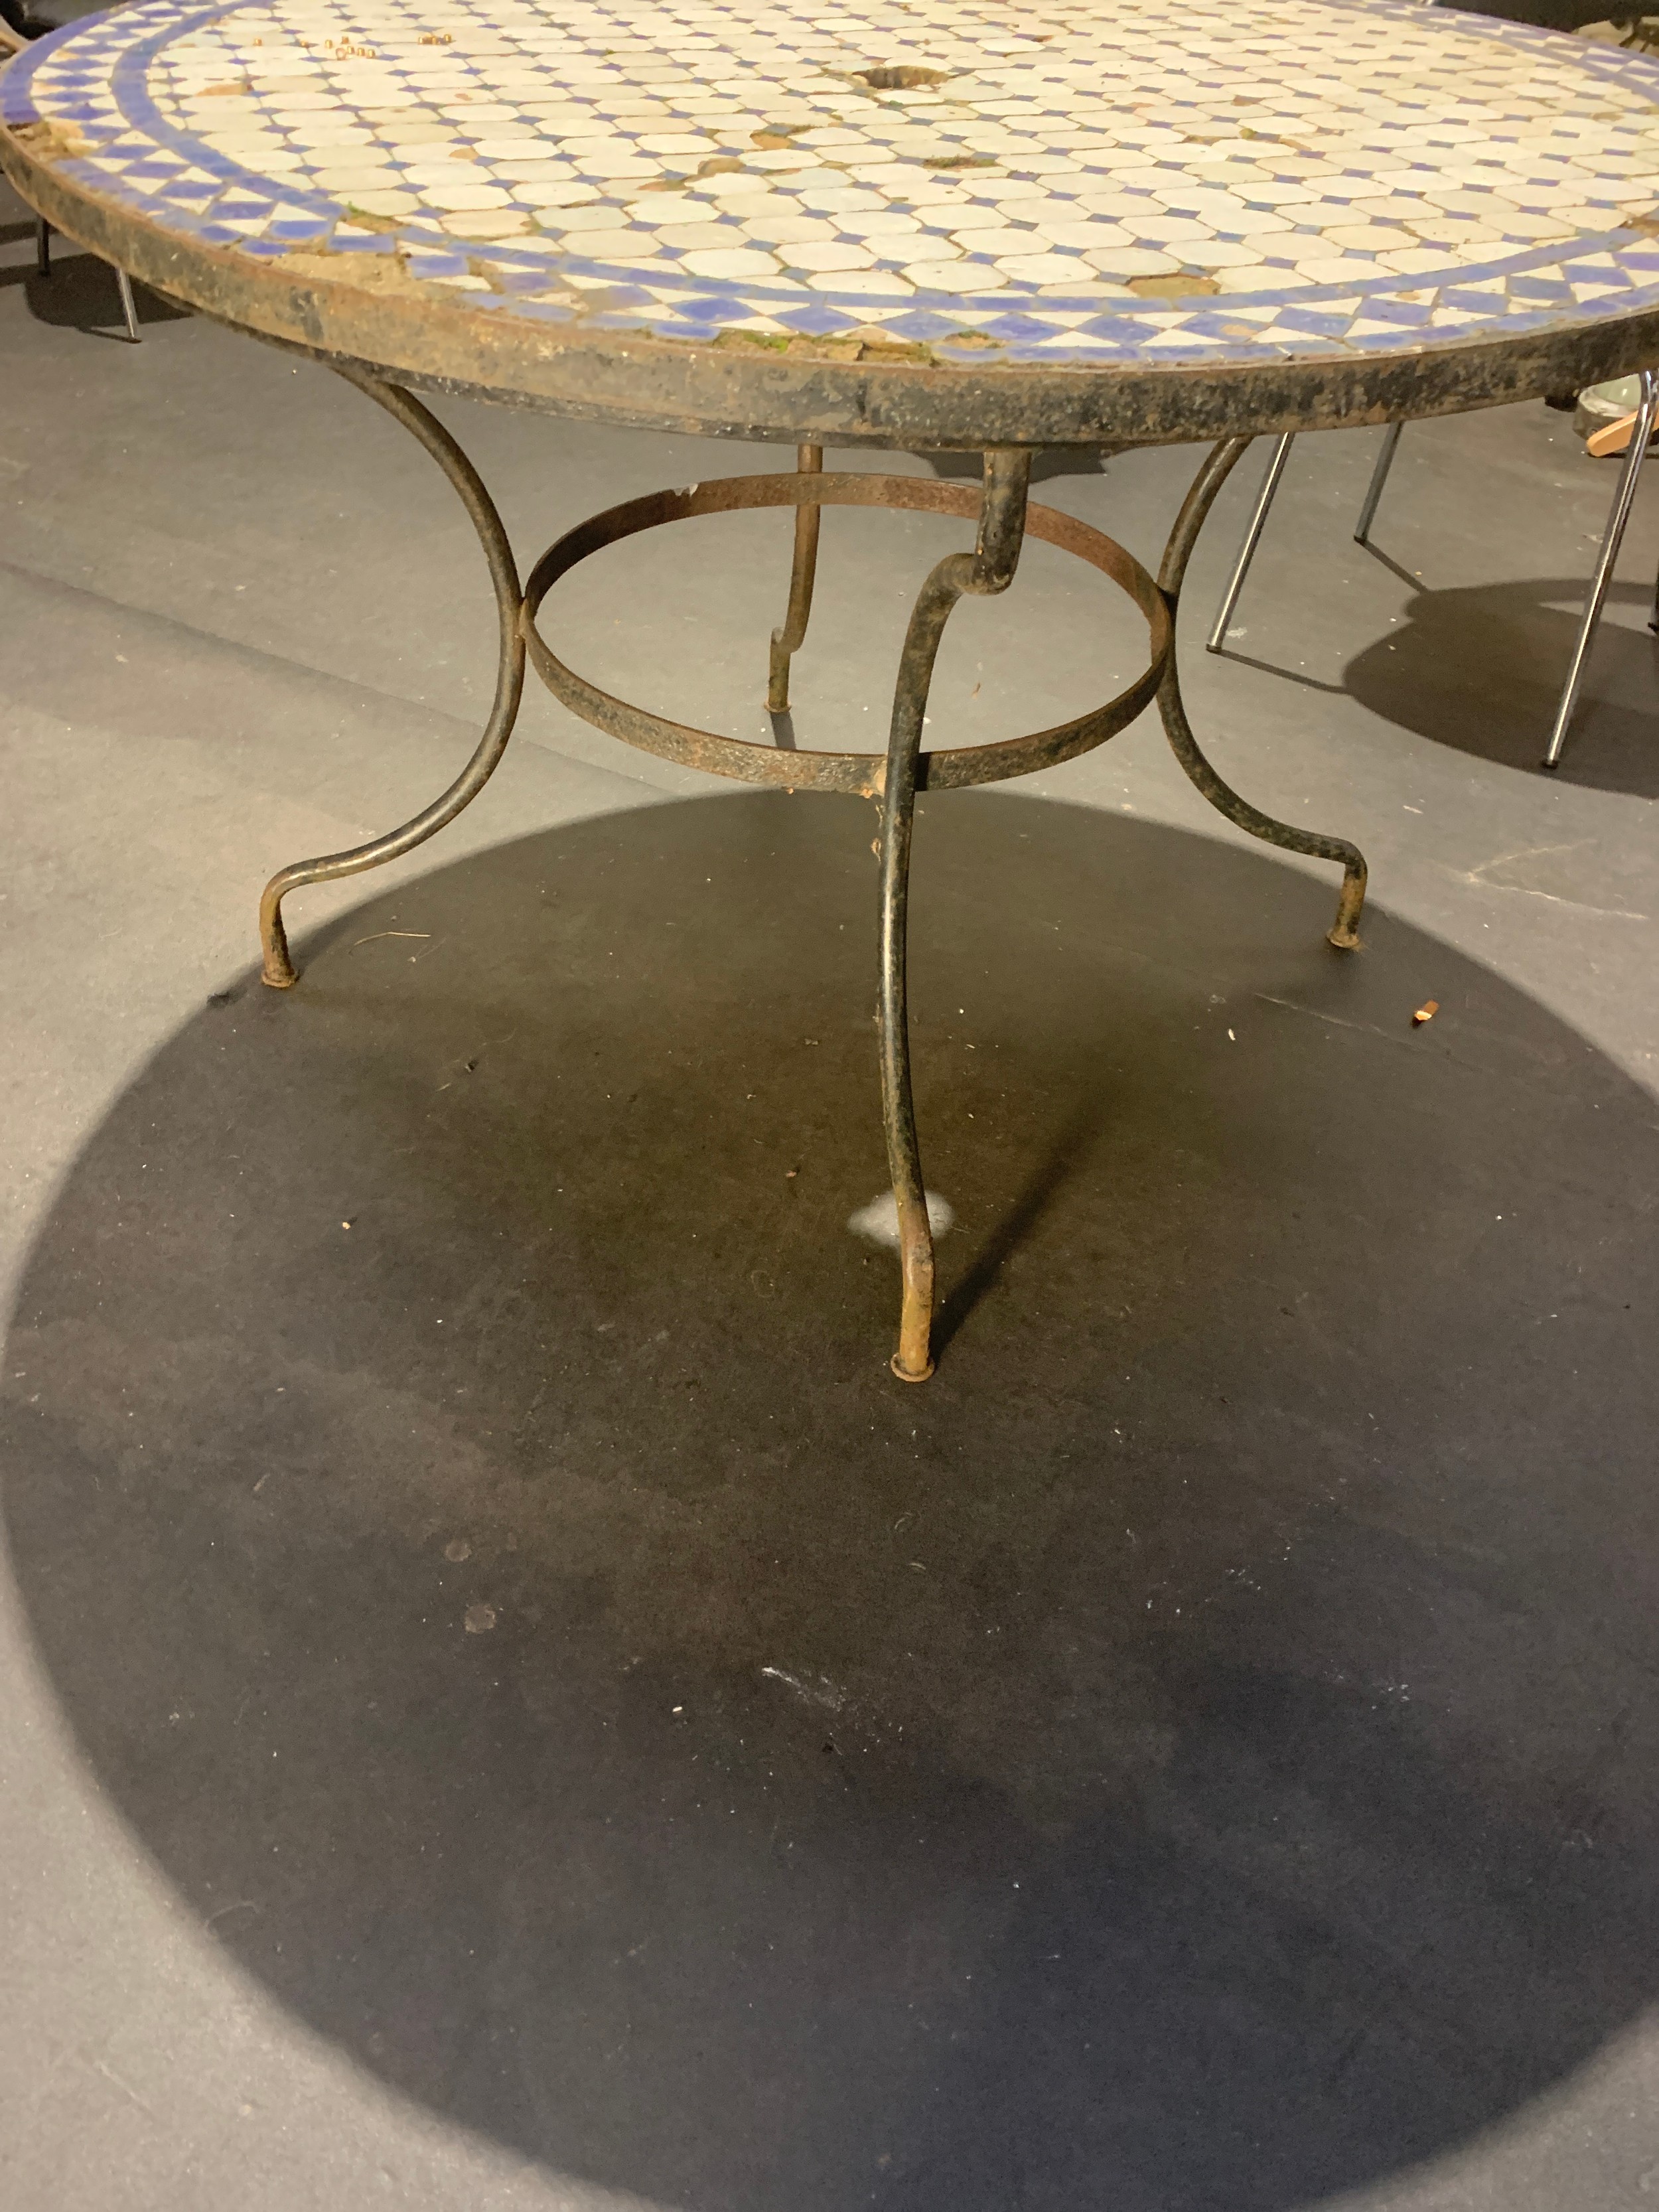 Mosaic table with metal base - Image 2 of 2